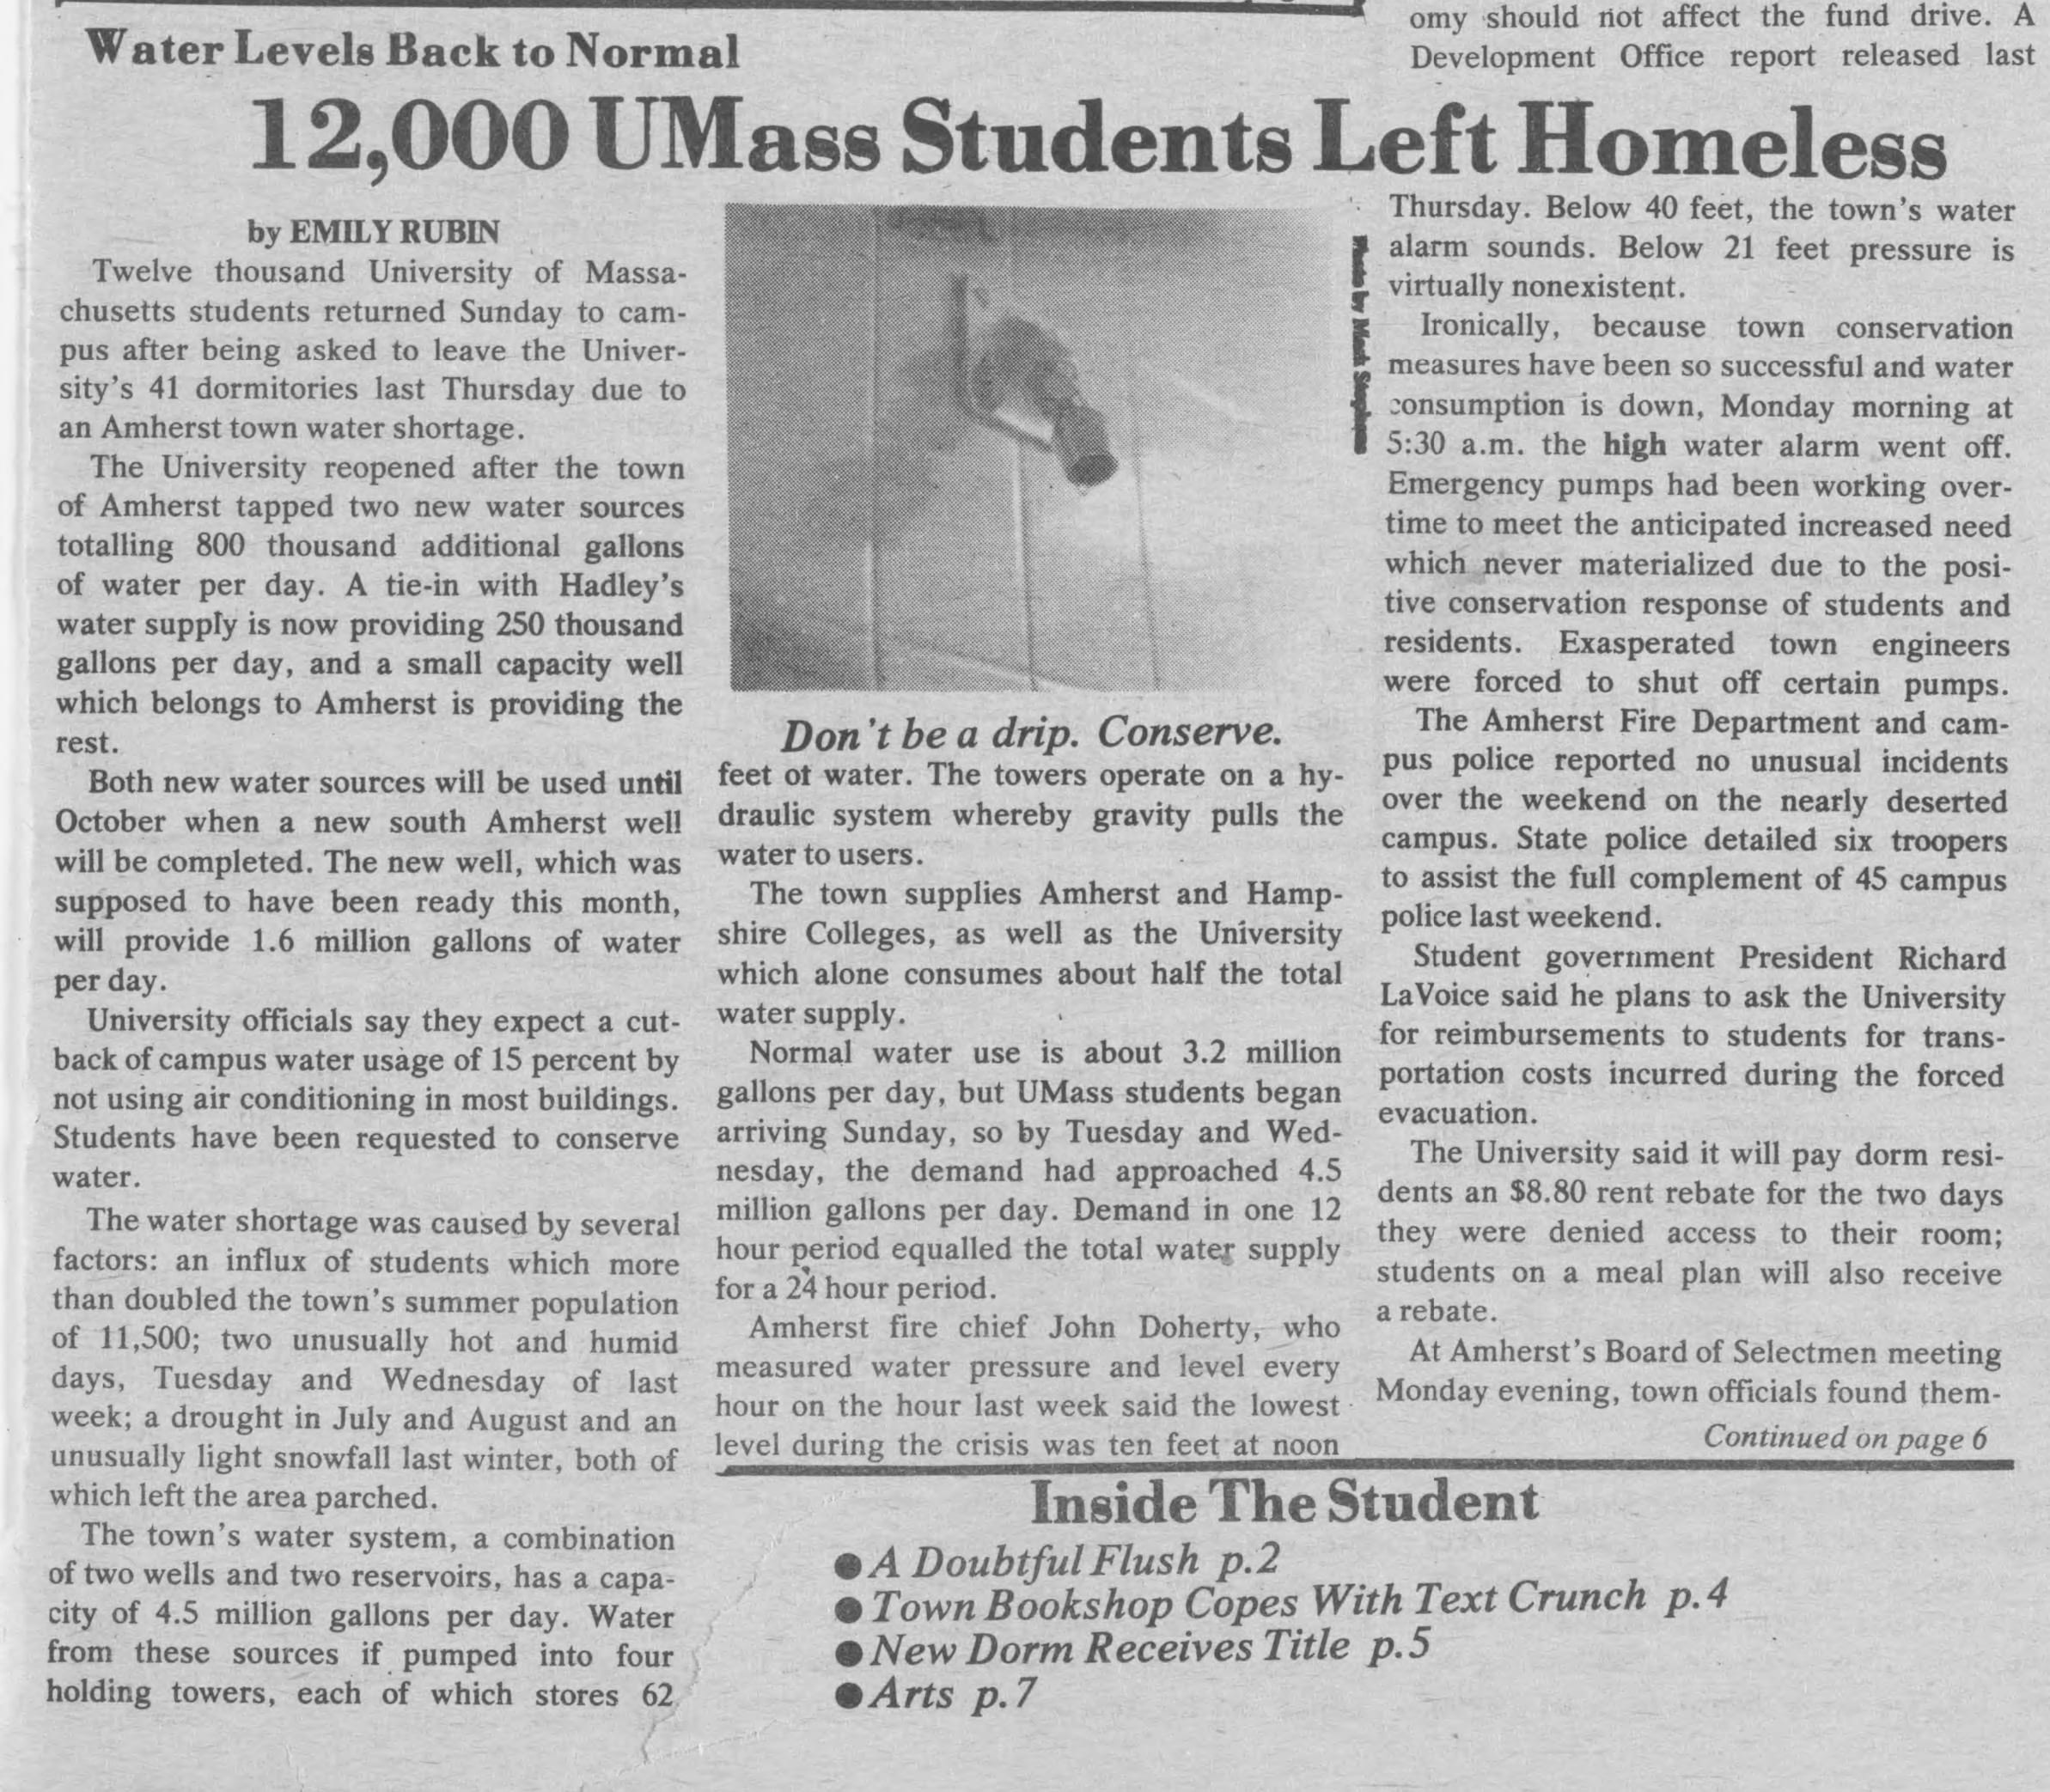 The Amherst Student, Sept. 11, 1980